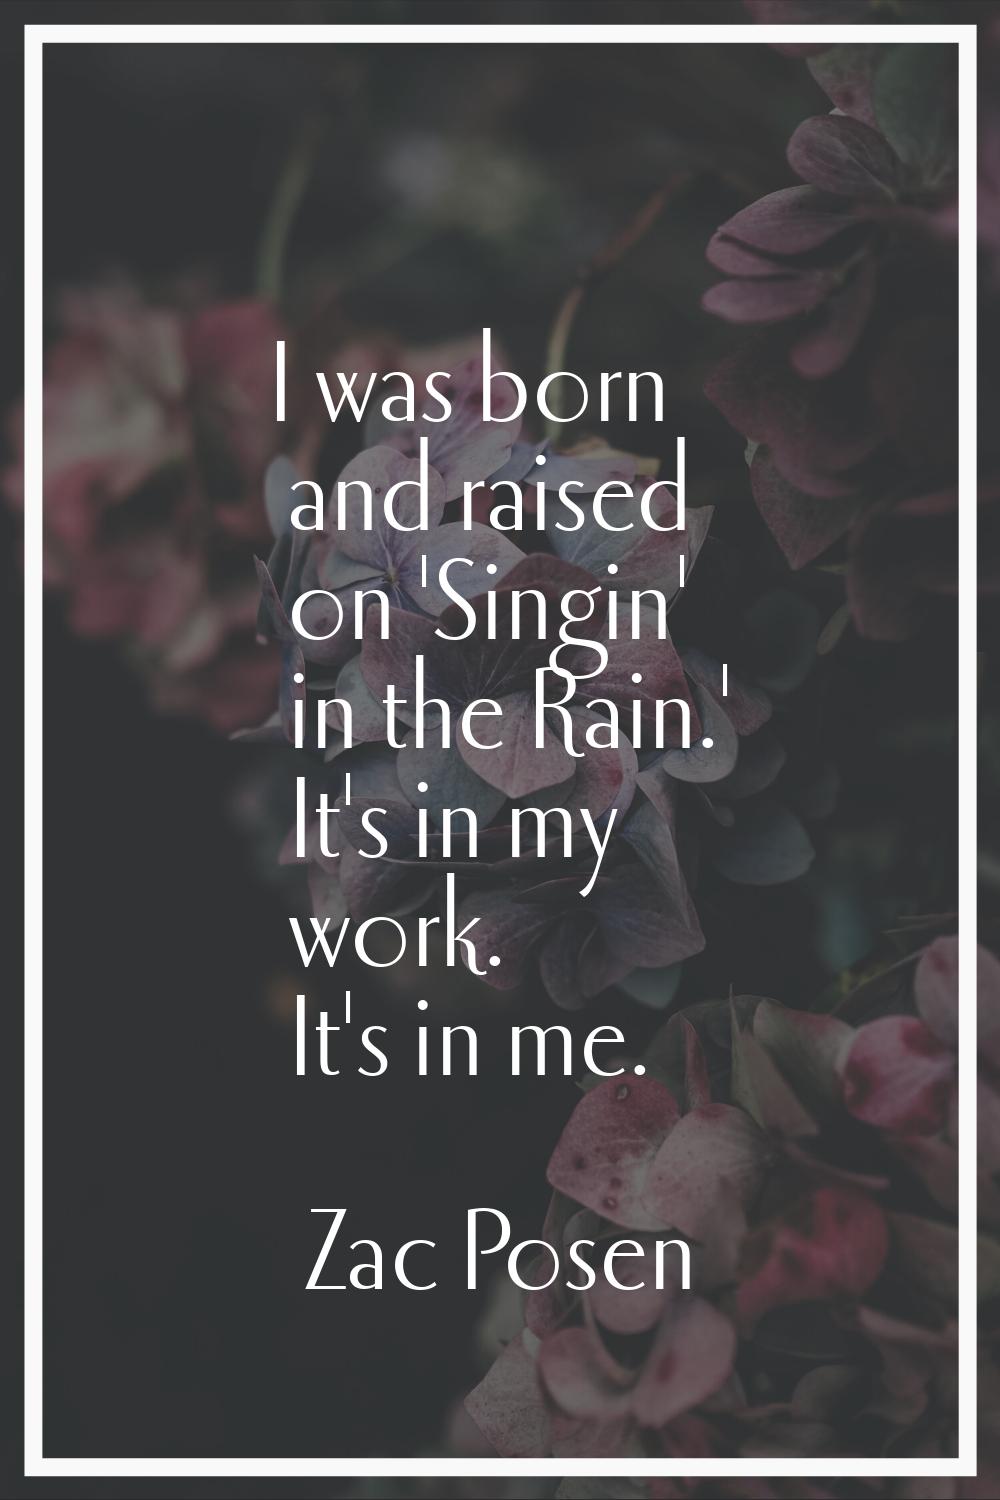 I was born and raised on 'Singin' in the Rain.' It's in my work. It's in me.